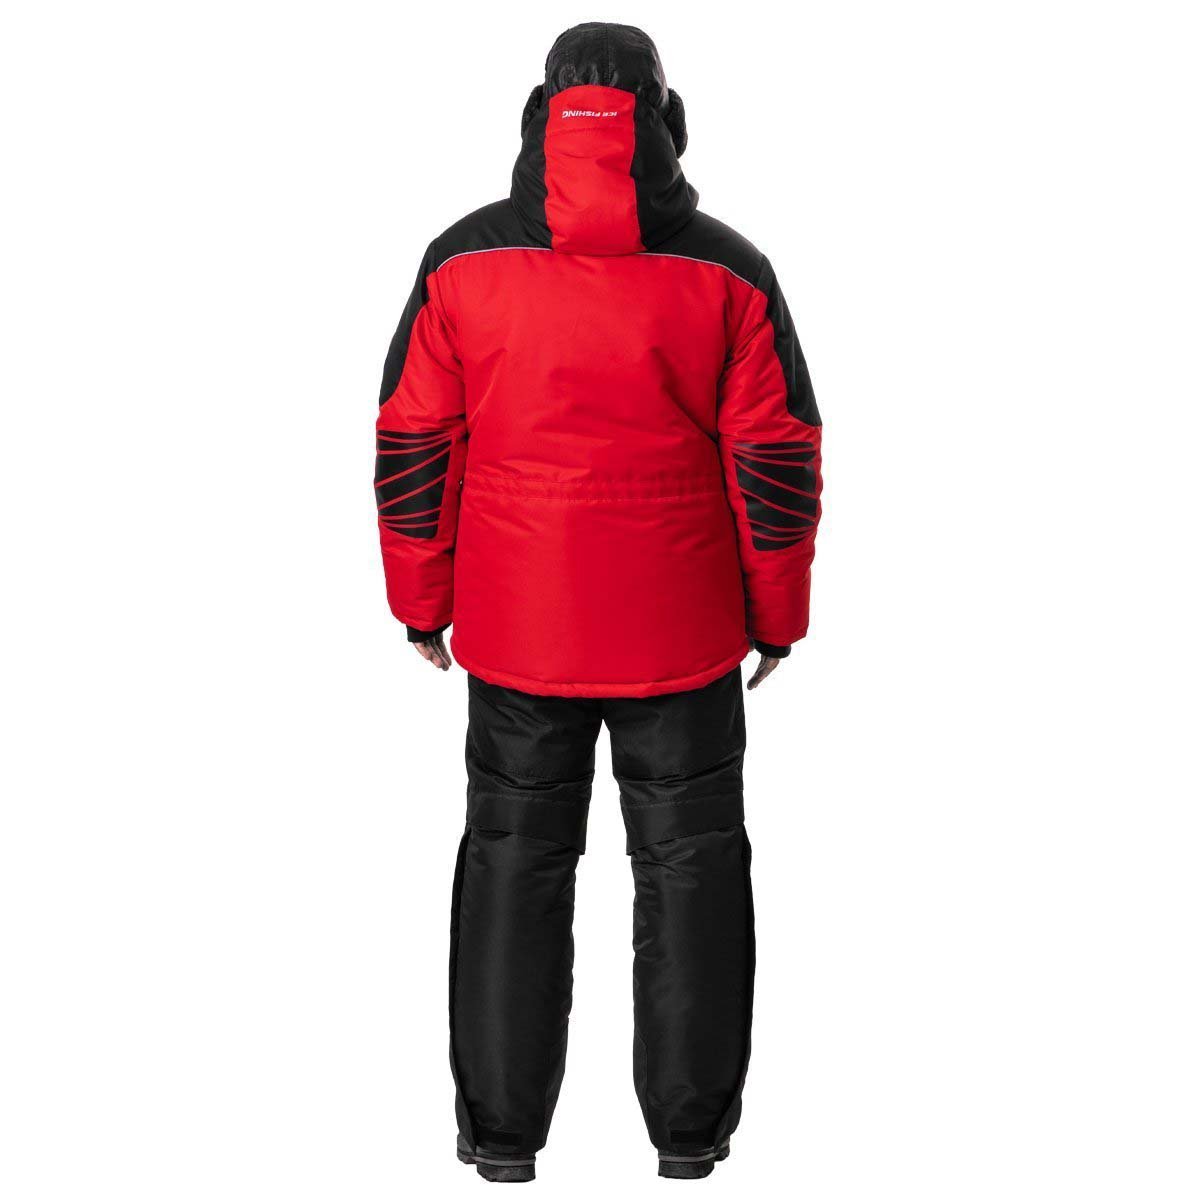 Angler Pro Jacket and Bibs Windproof Winter Set for Men, Red, back view